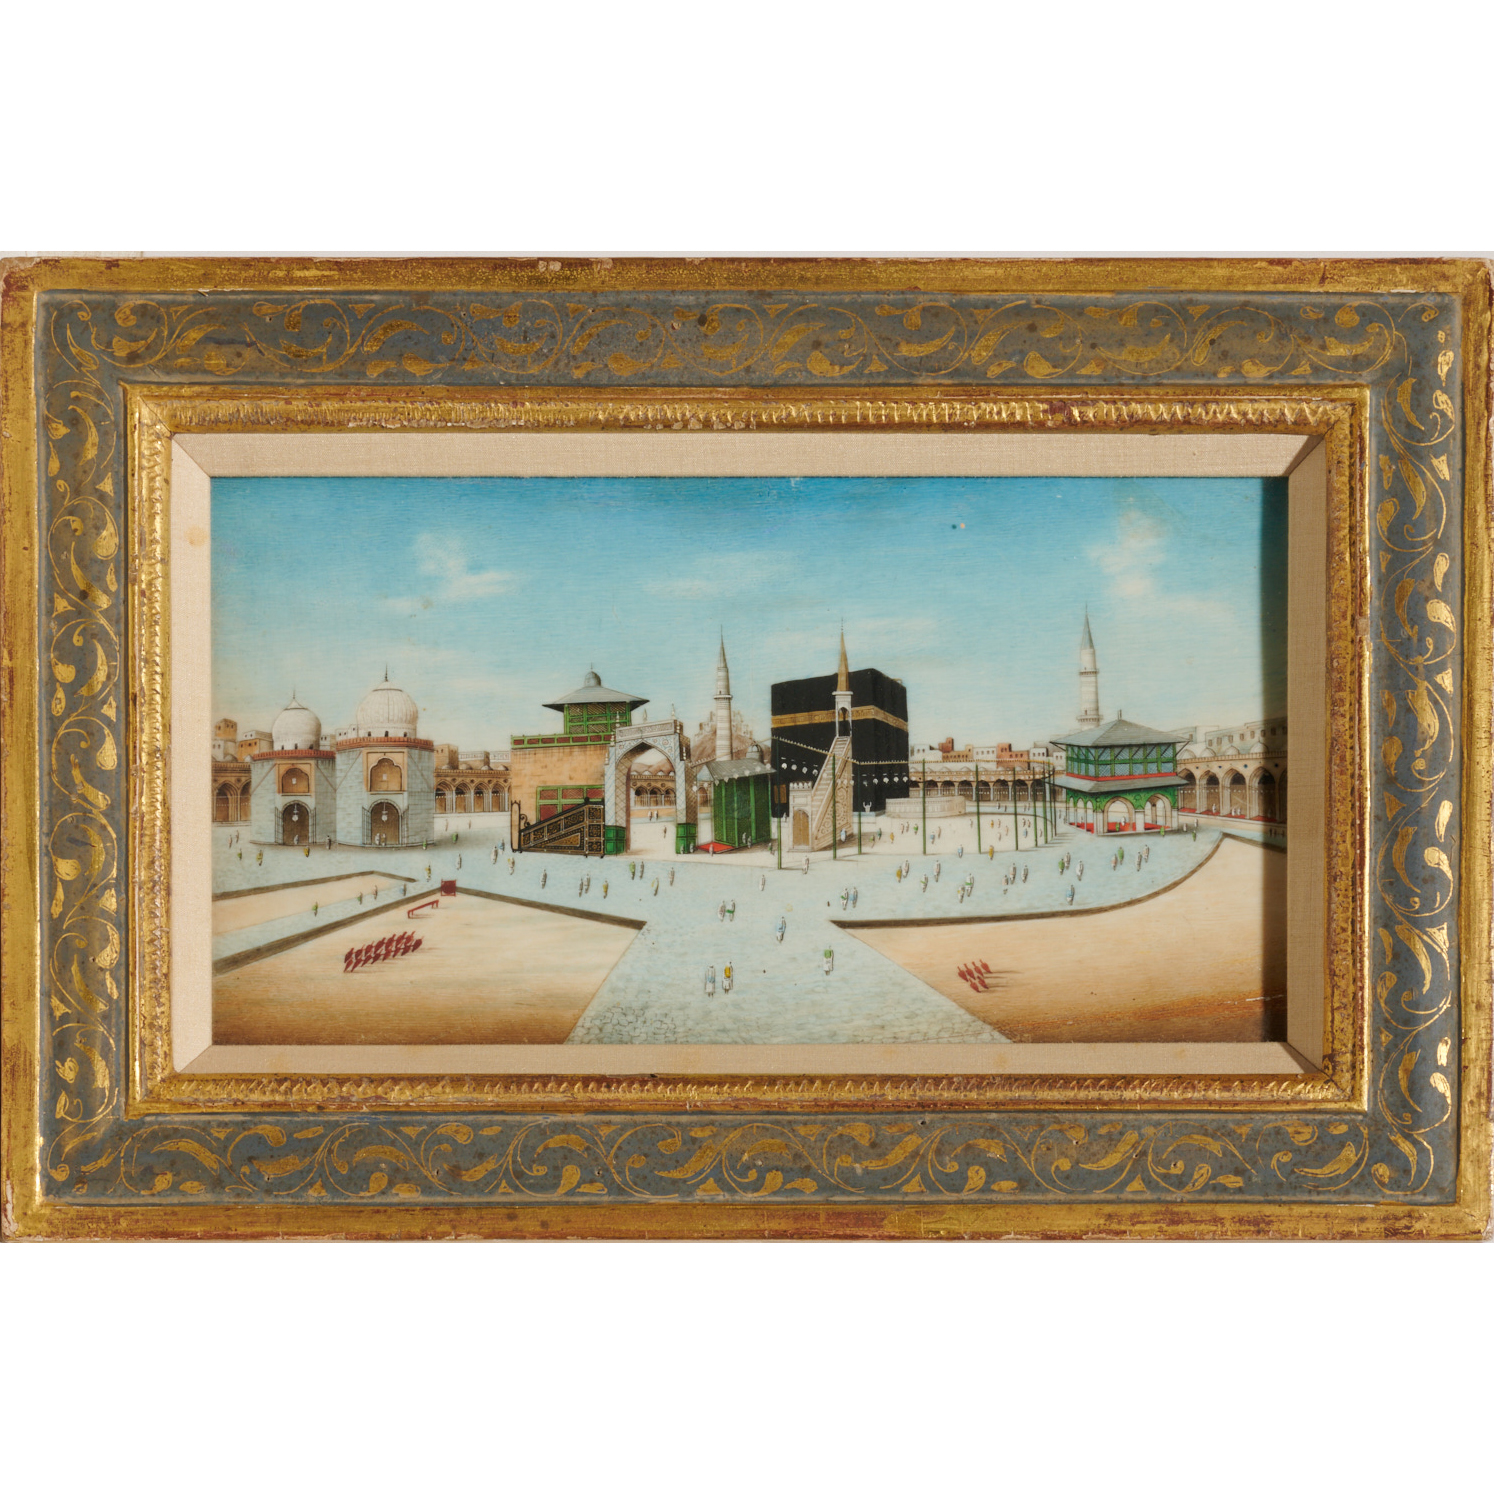 FINE MINIATURE PAINTING MECCA 30be83